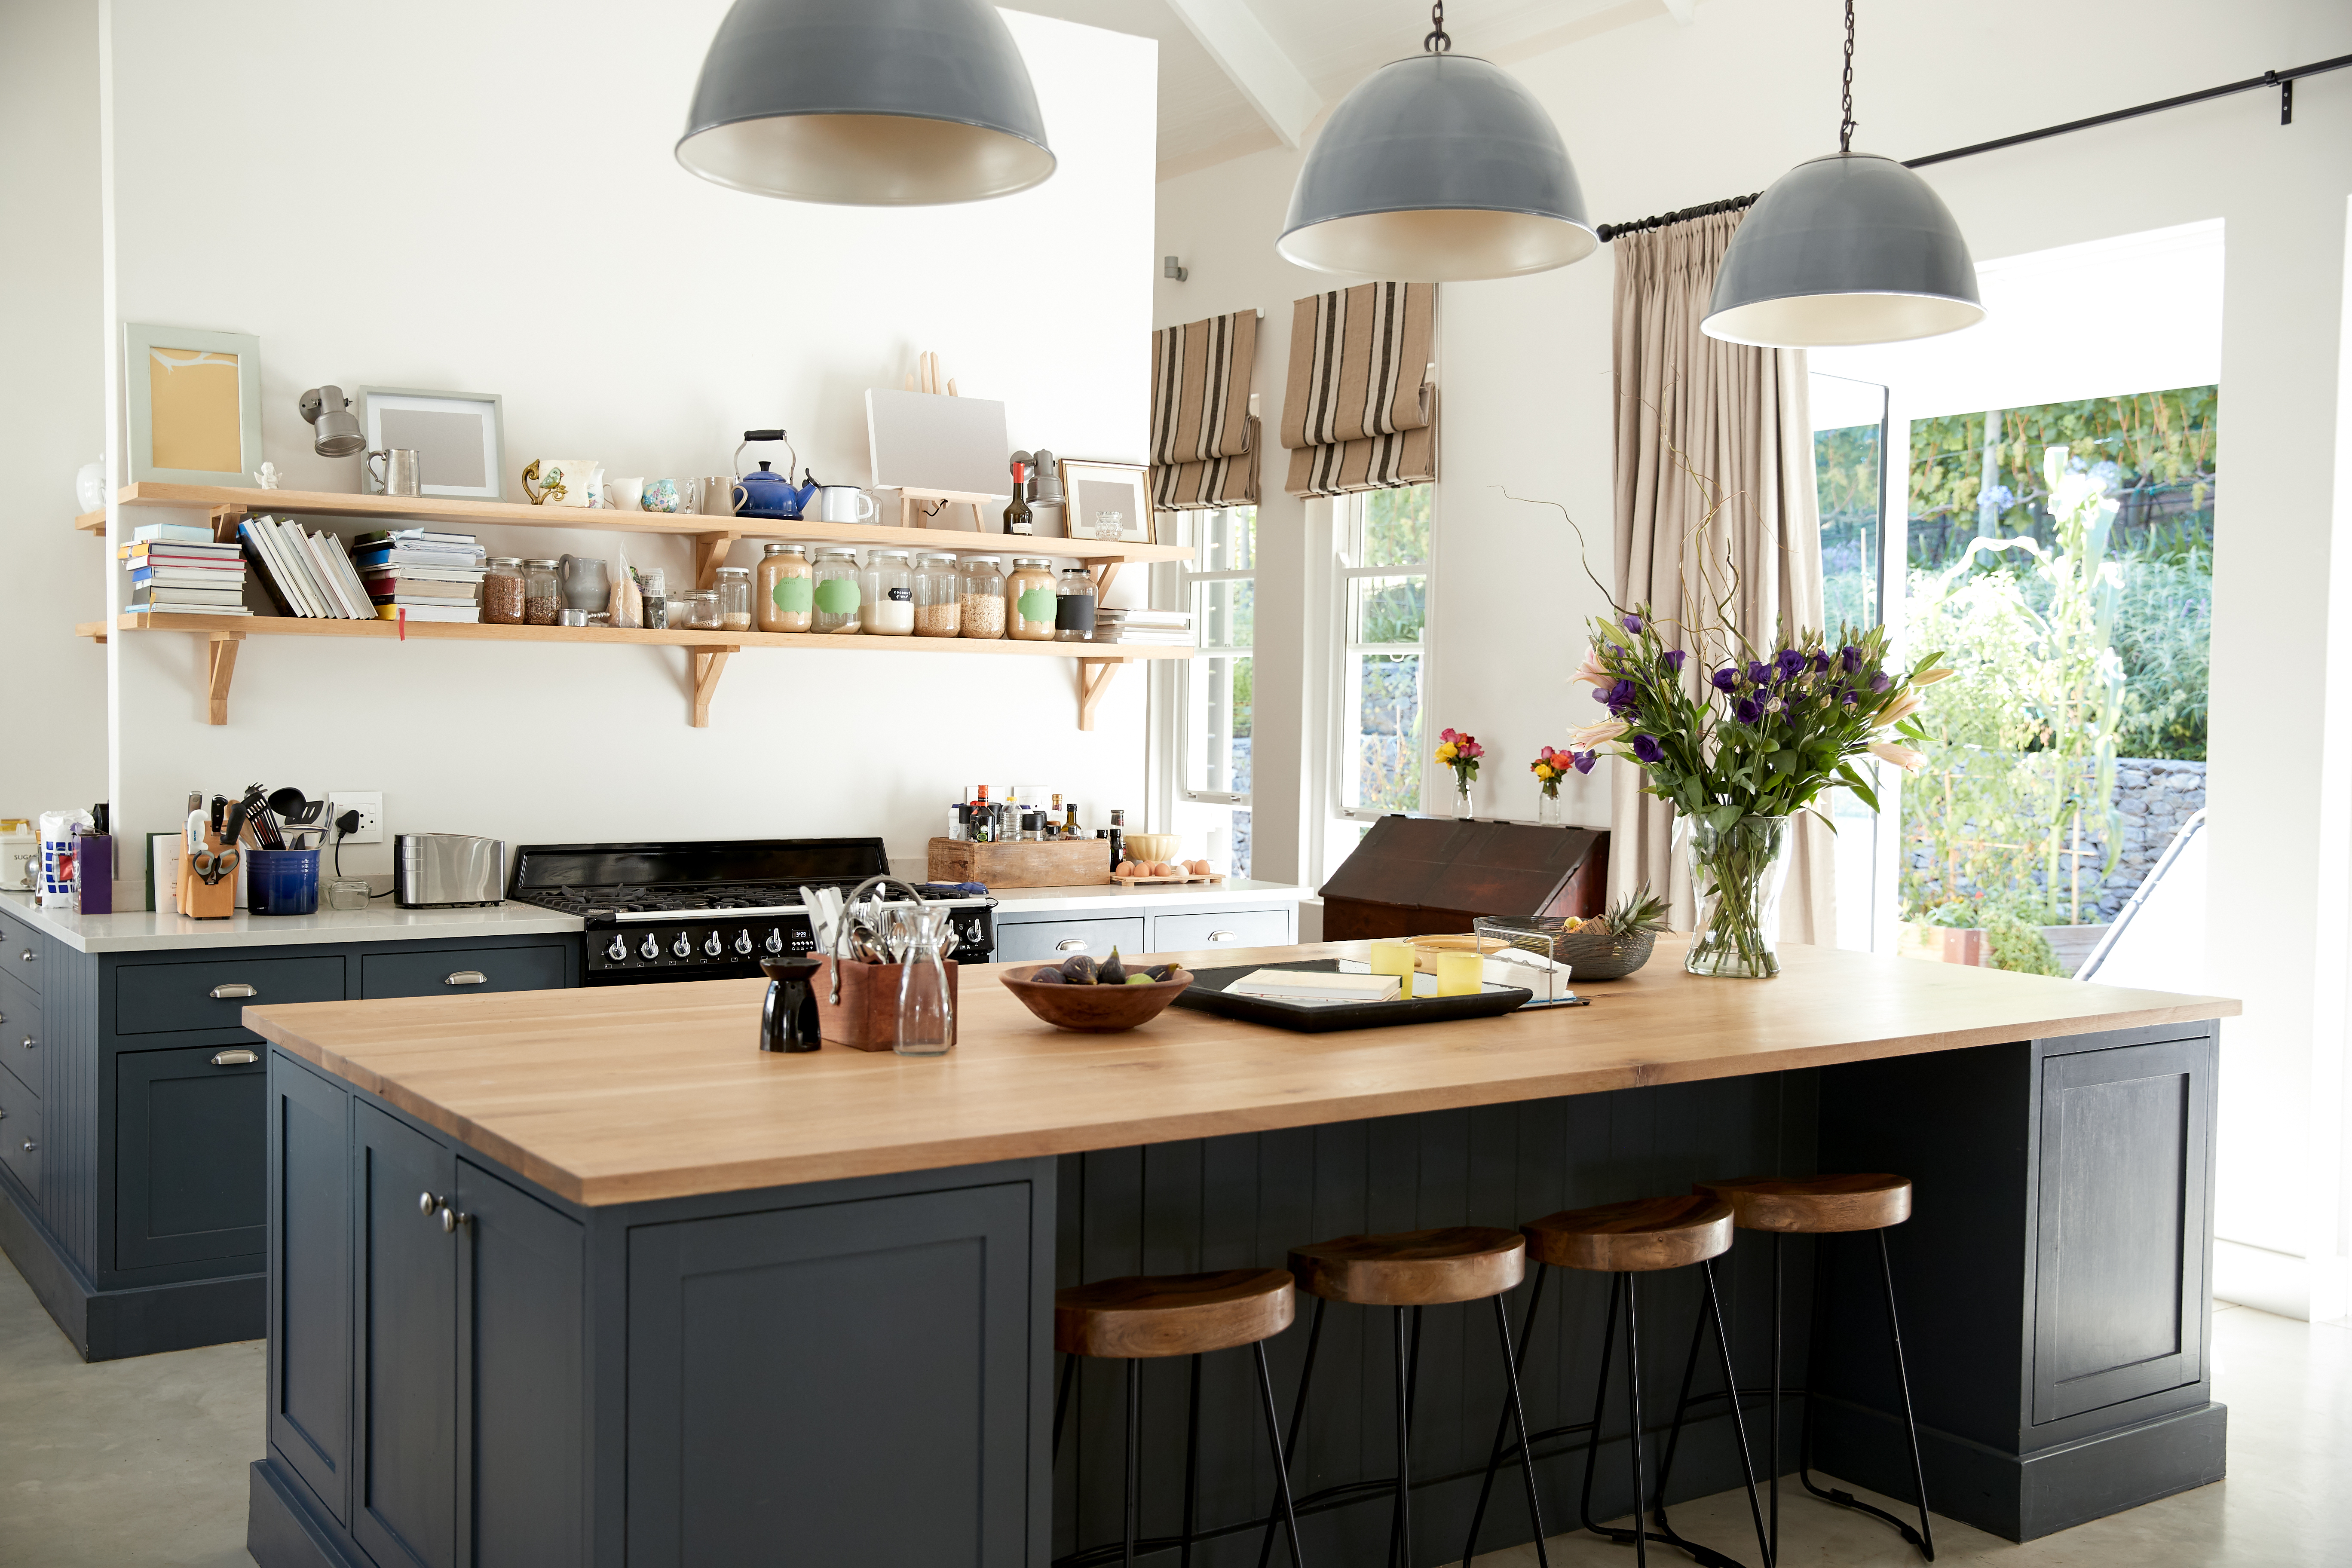 3 Ways To Complement A Butcher Block Countertop In Your Kitchen